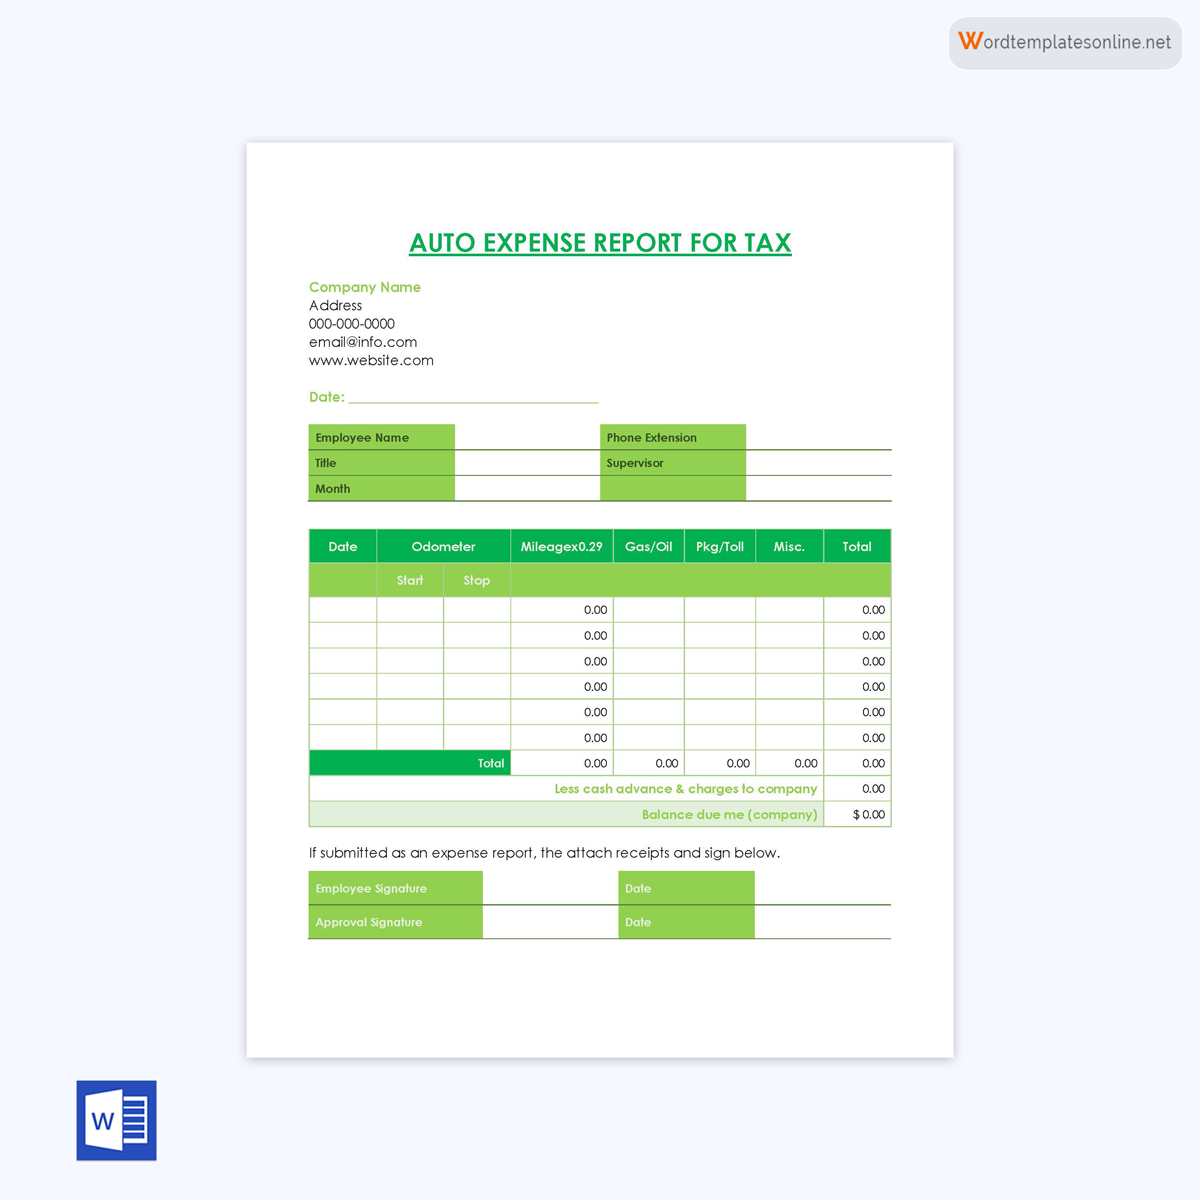 Auto Expense Report for Tax